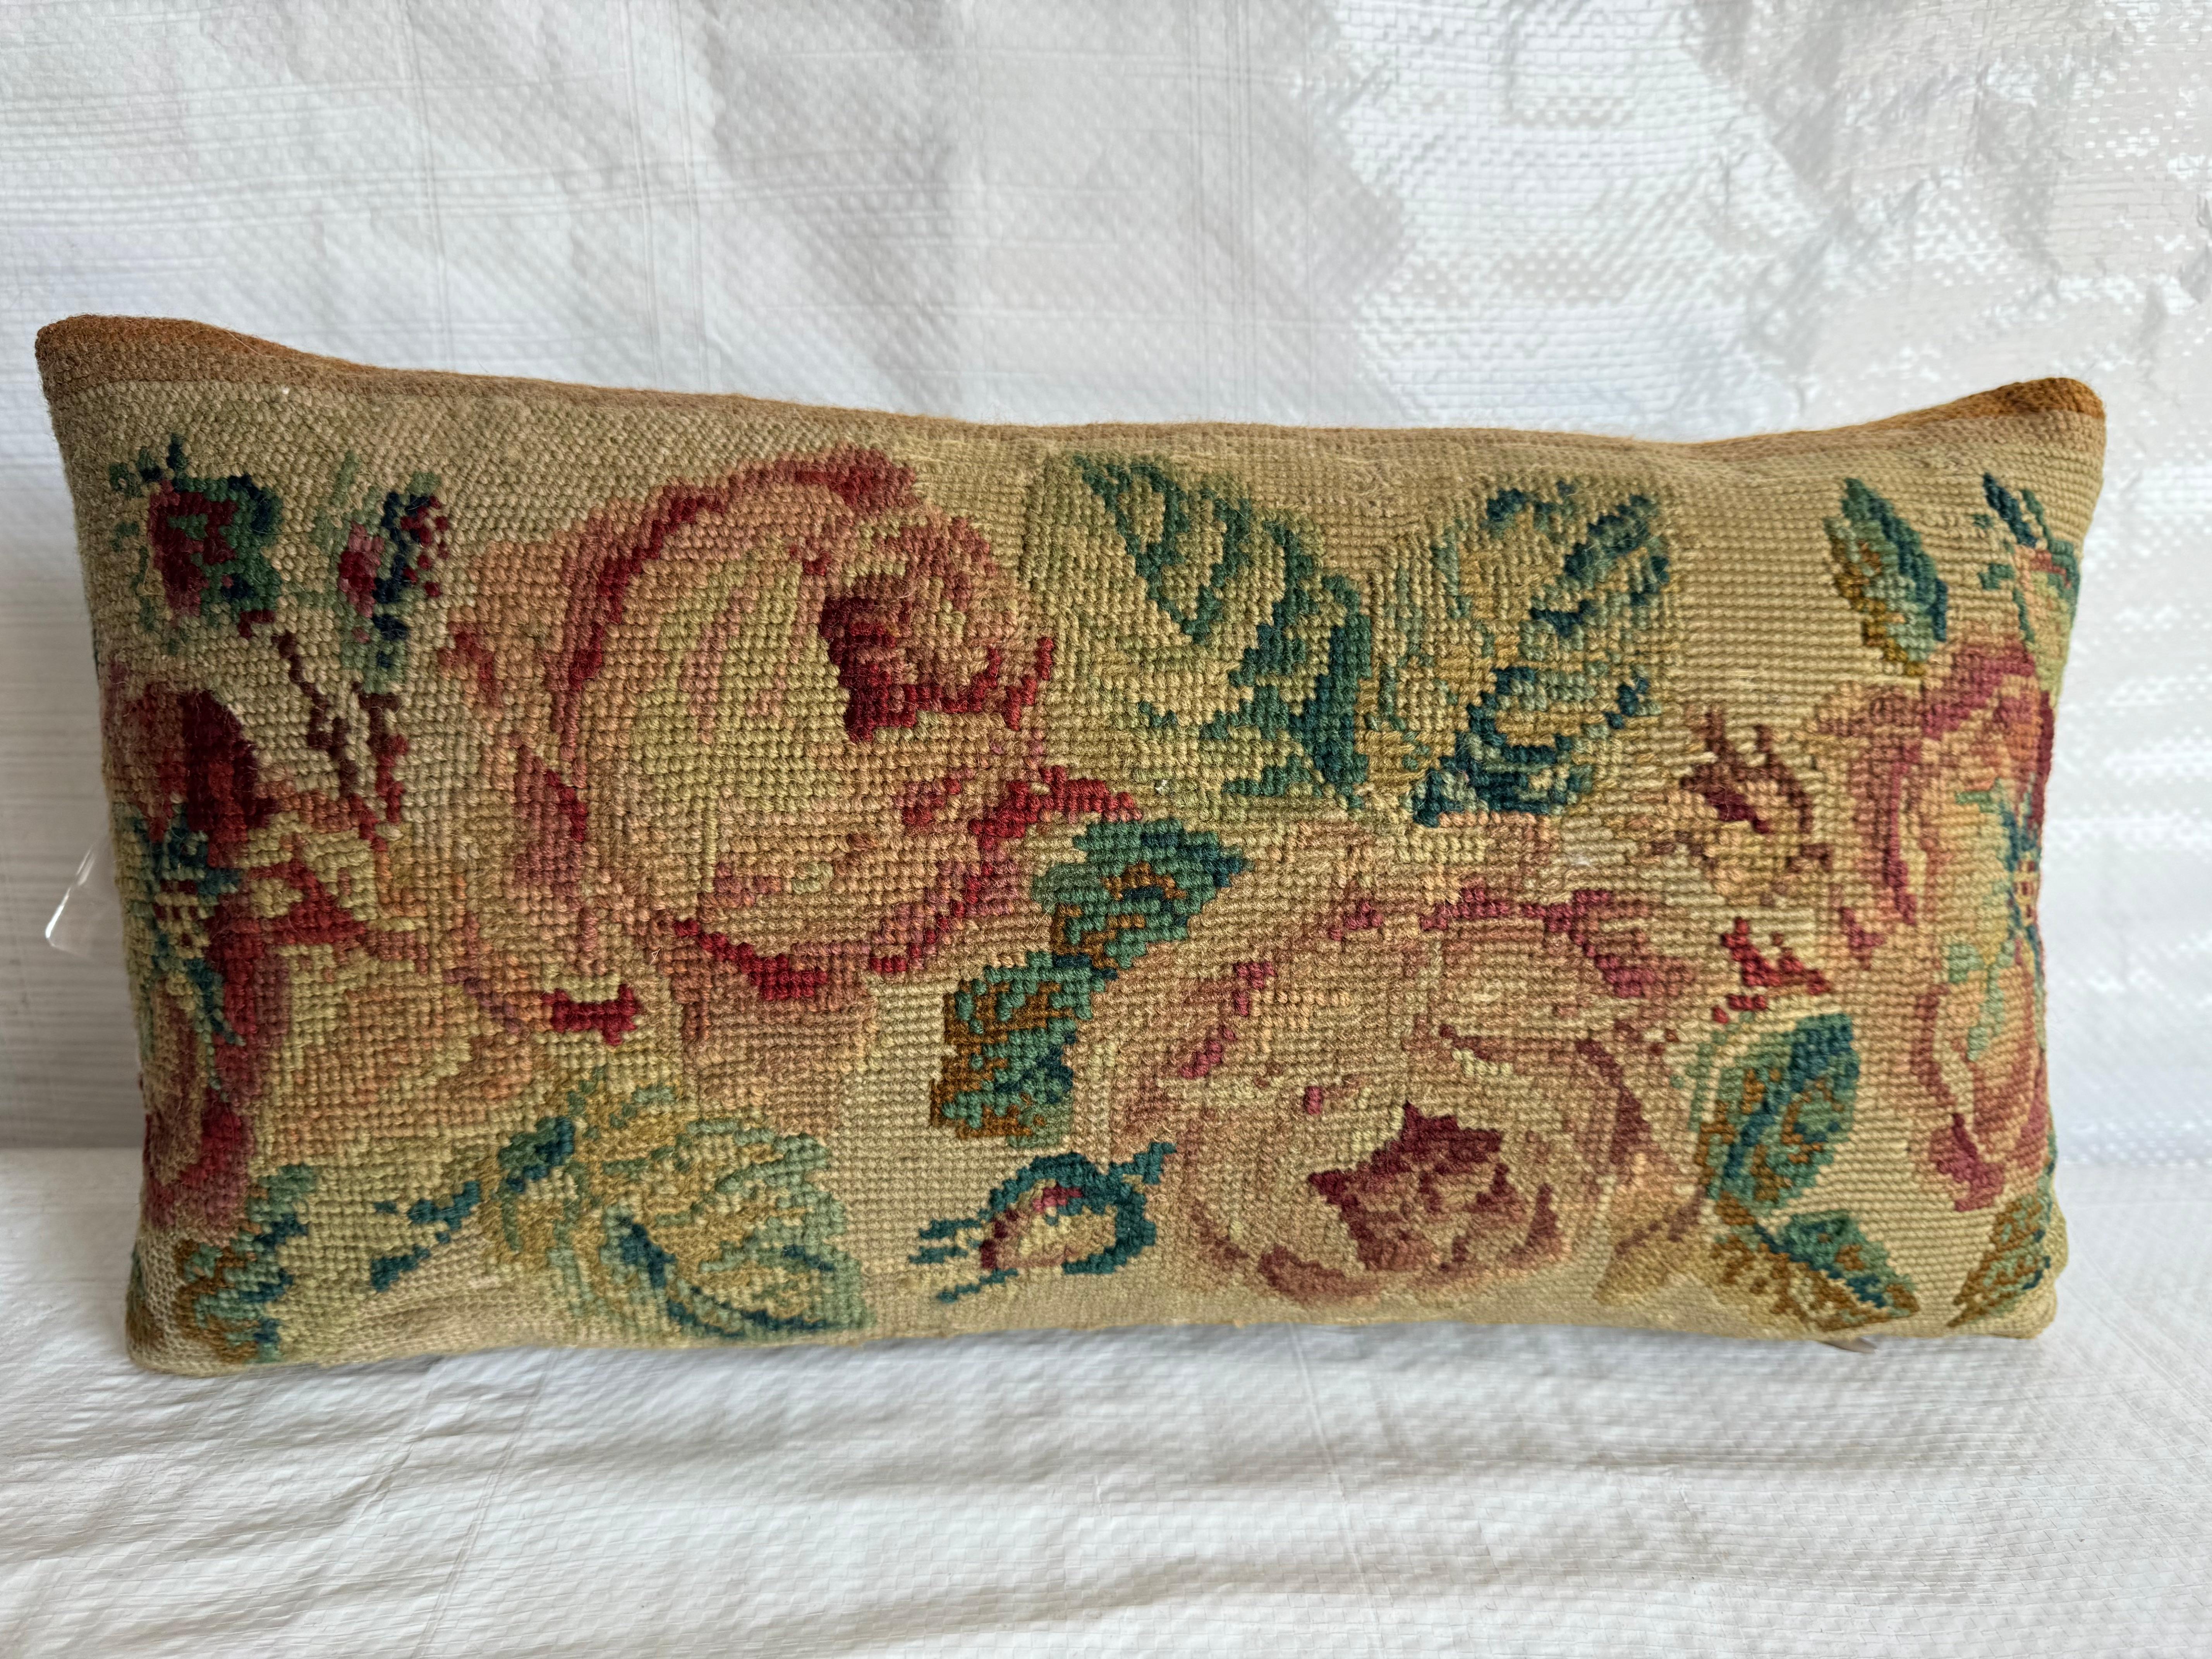 Immerse yourself in the whispers of Victorian elegance with our 1854 English Needlework Pillow, measuring 17